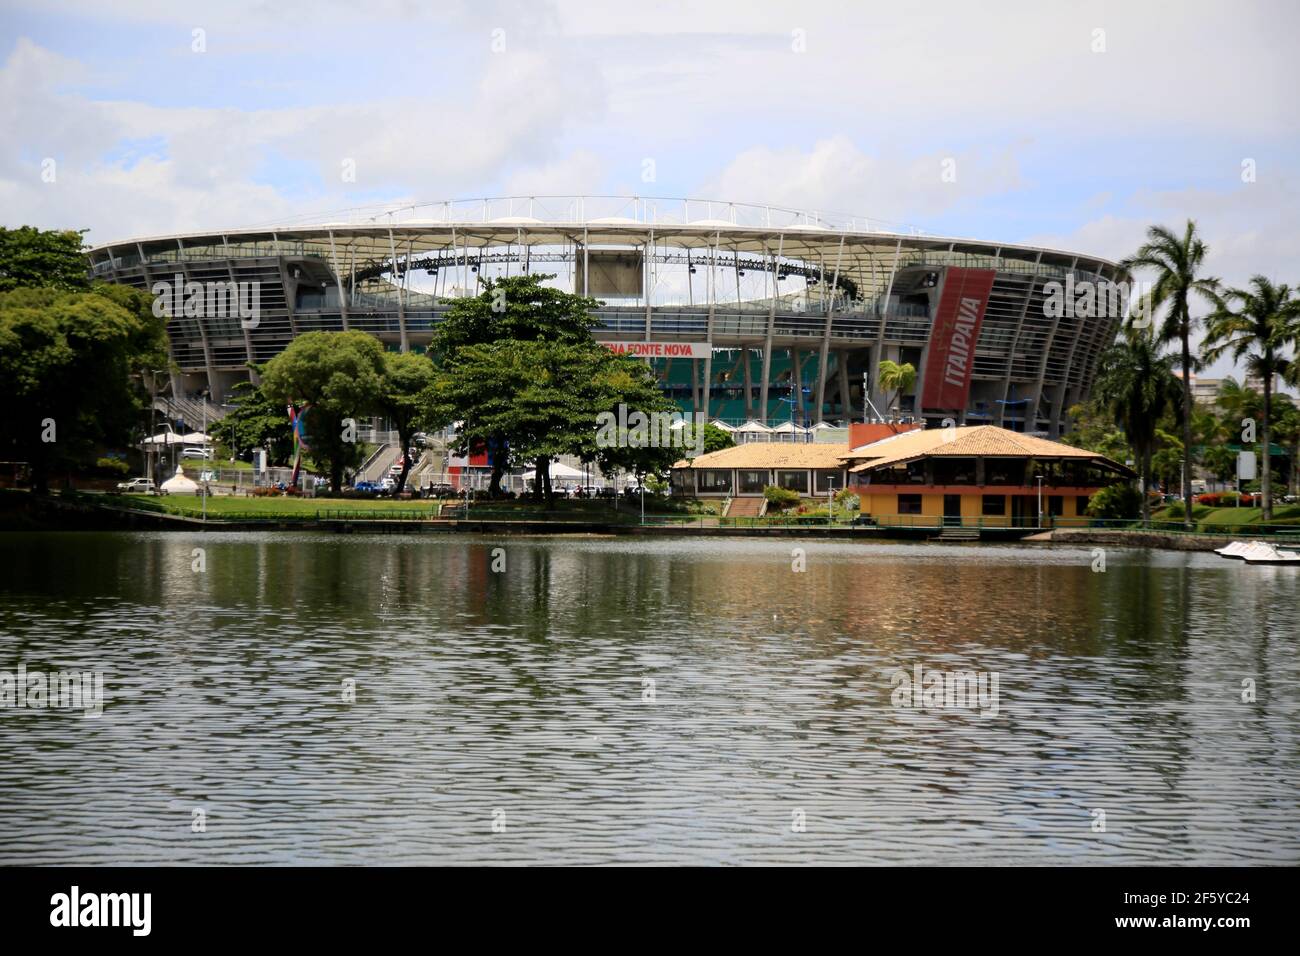 salvador, bahia, brazil - january 29, 2021: view of the lake of Dique de Tororo and in the background the Fonte Nova Arena in the city of Salvador. ** Stock Photo